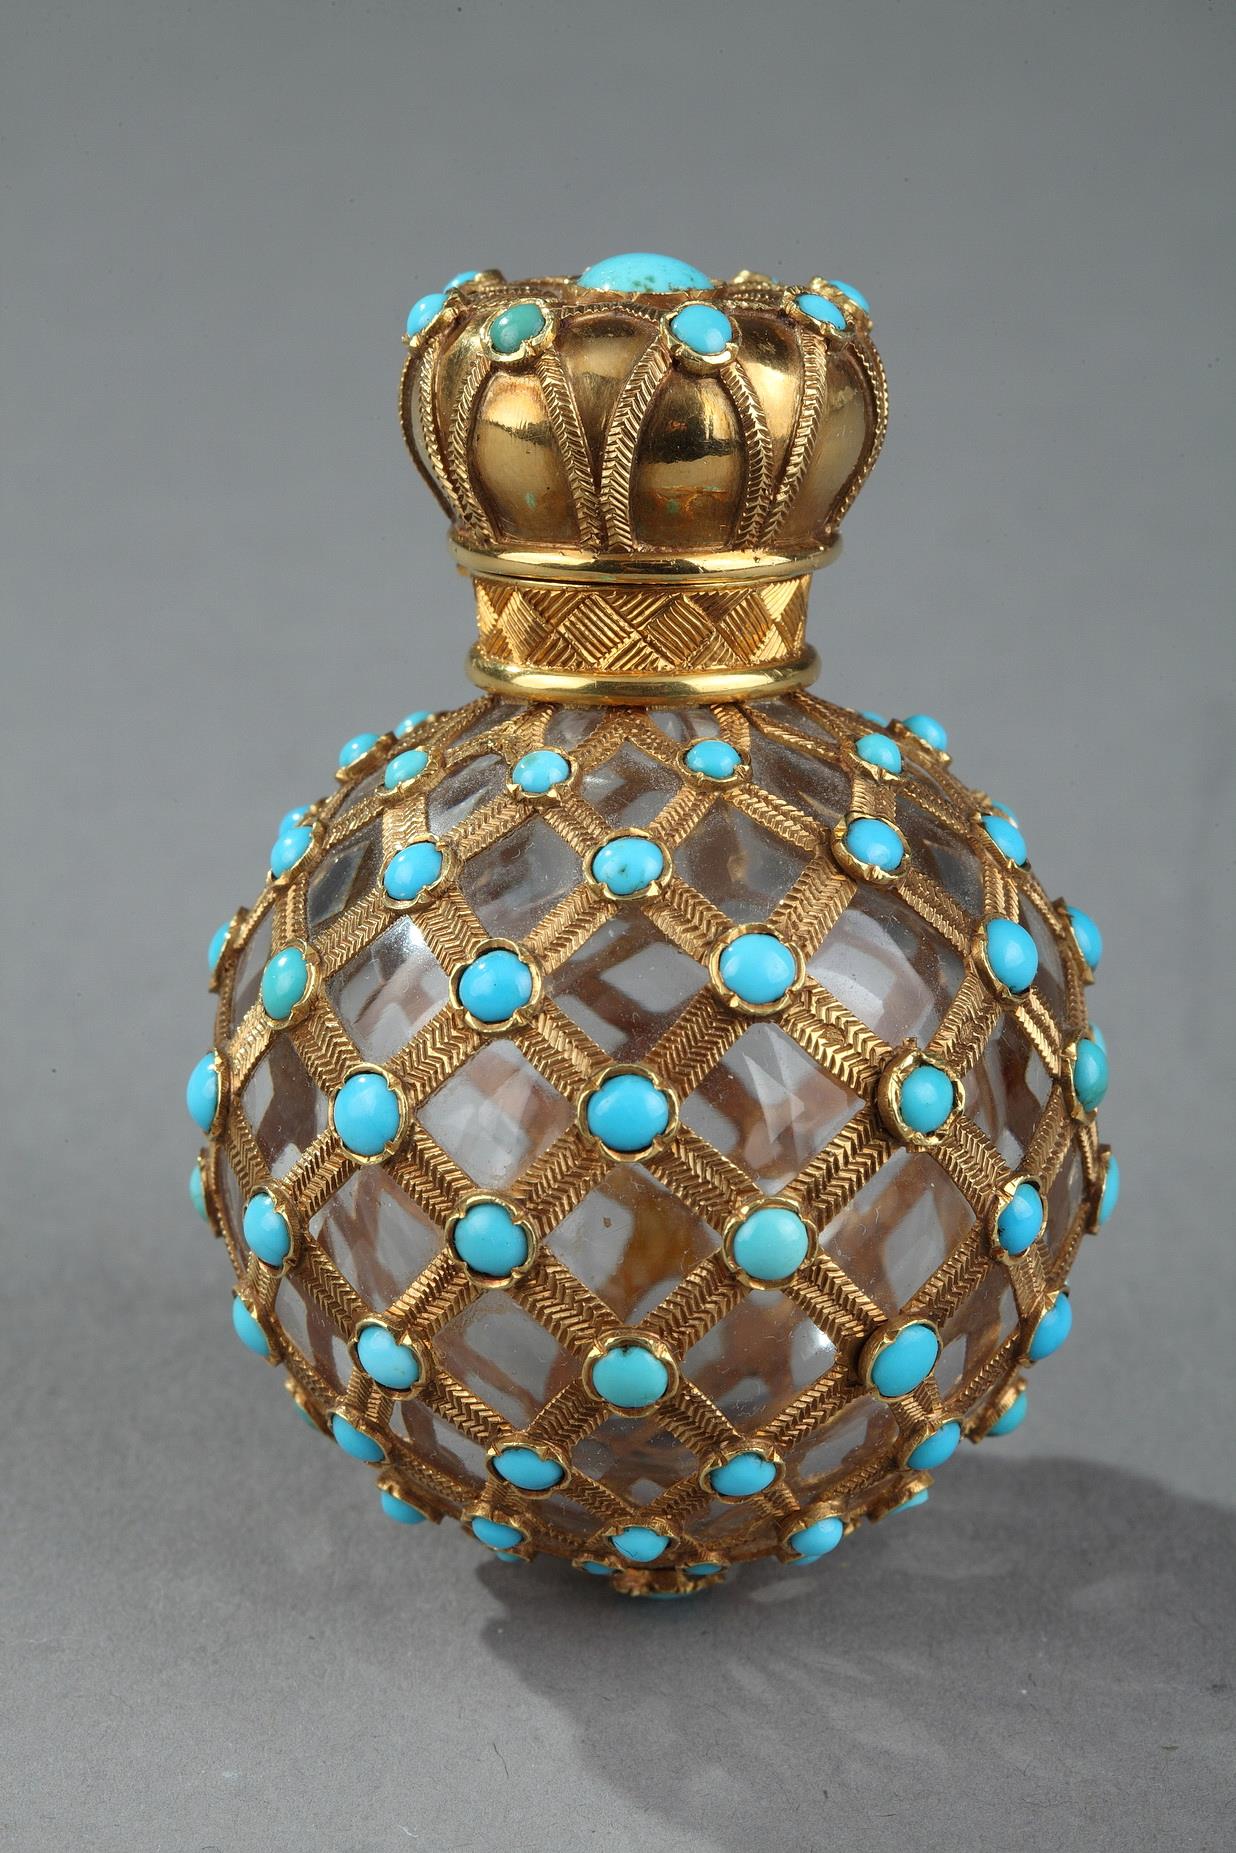 Gold, crystal and turquoise Perfume flask.
Restauration Period.